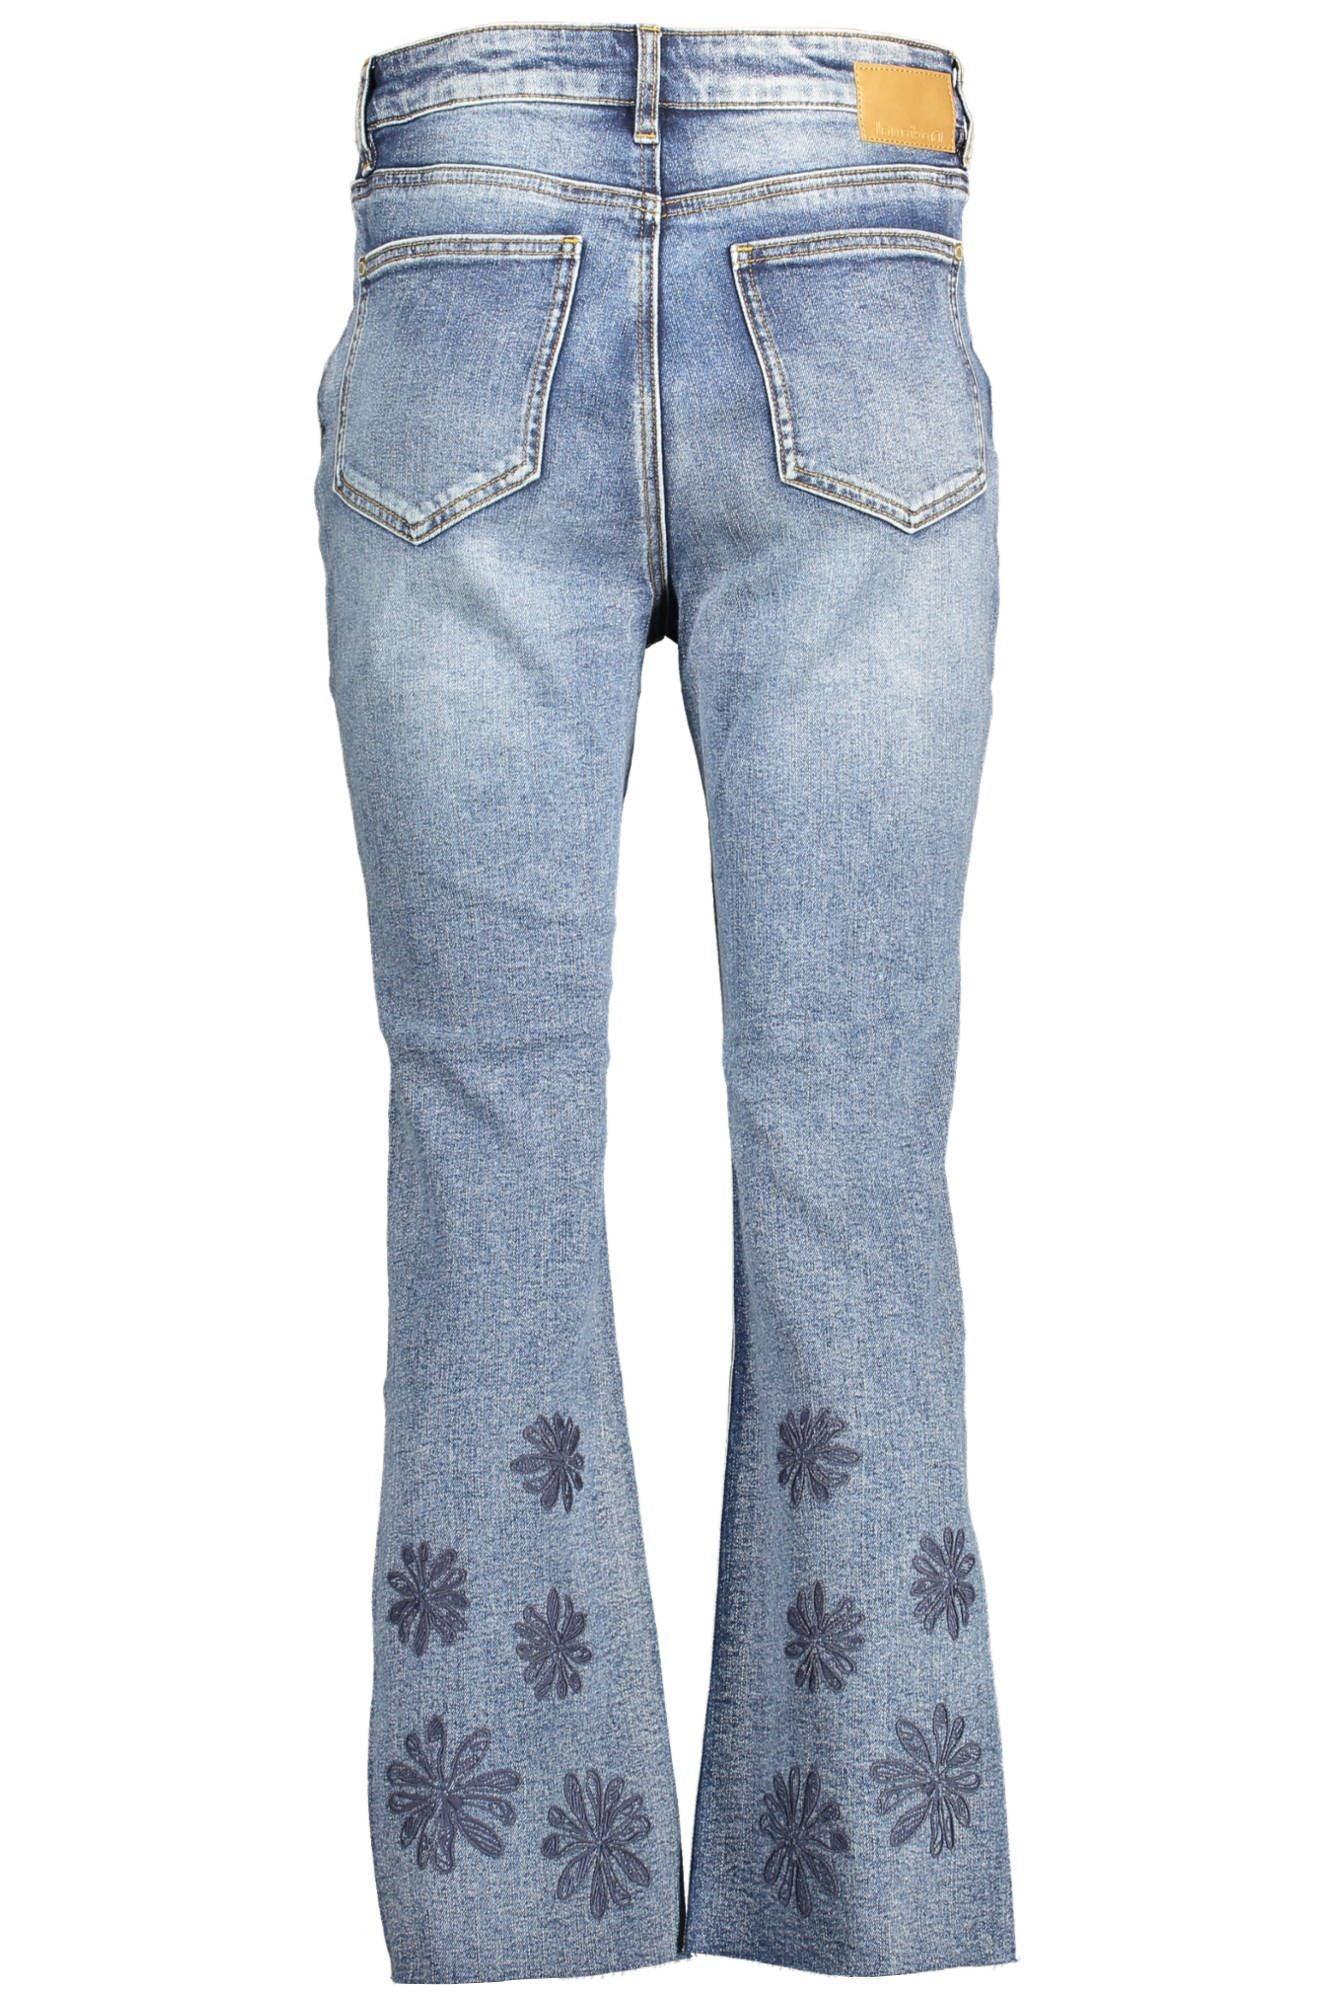 Desigual Chic Embroidered Faded Jeans with Contrasting Accents - PER.FASHION